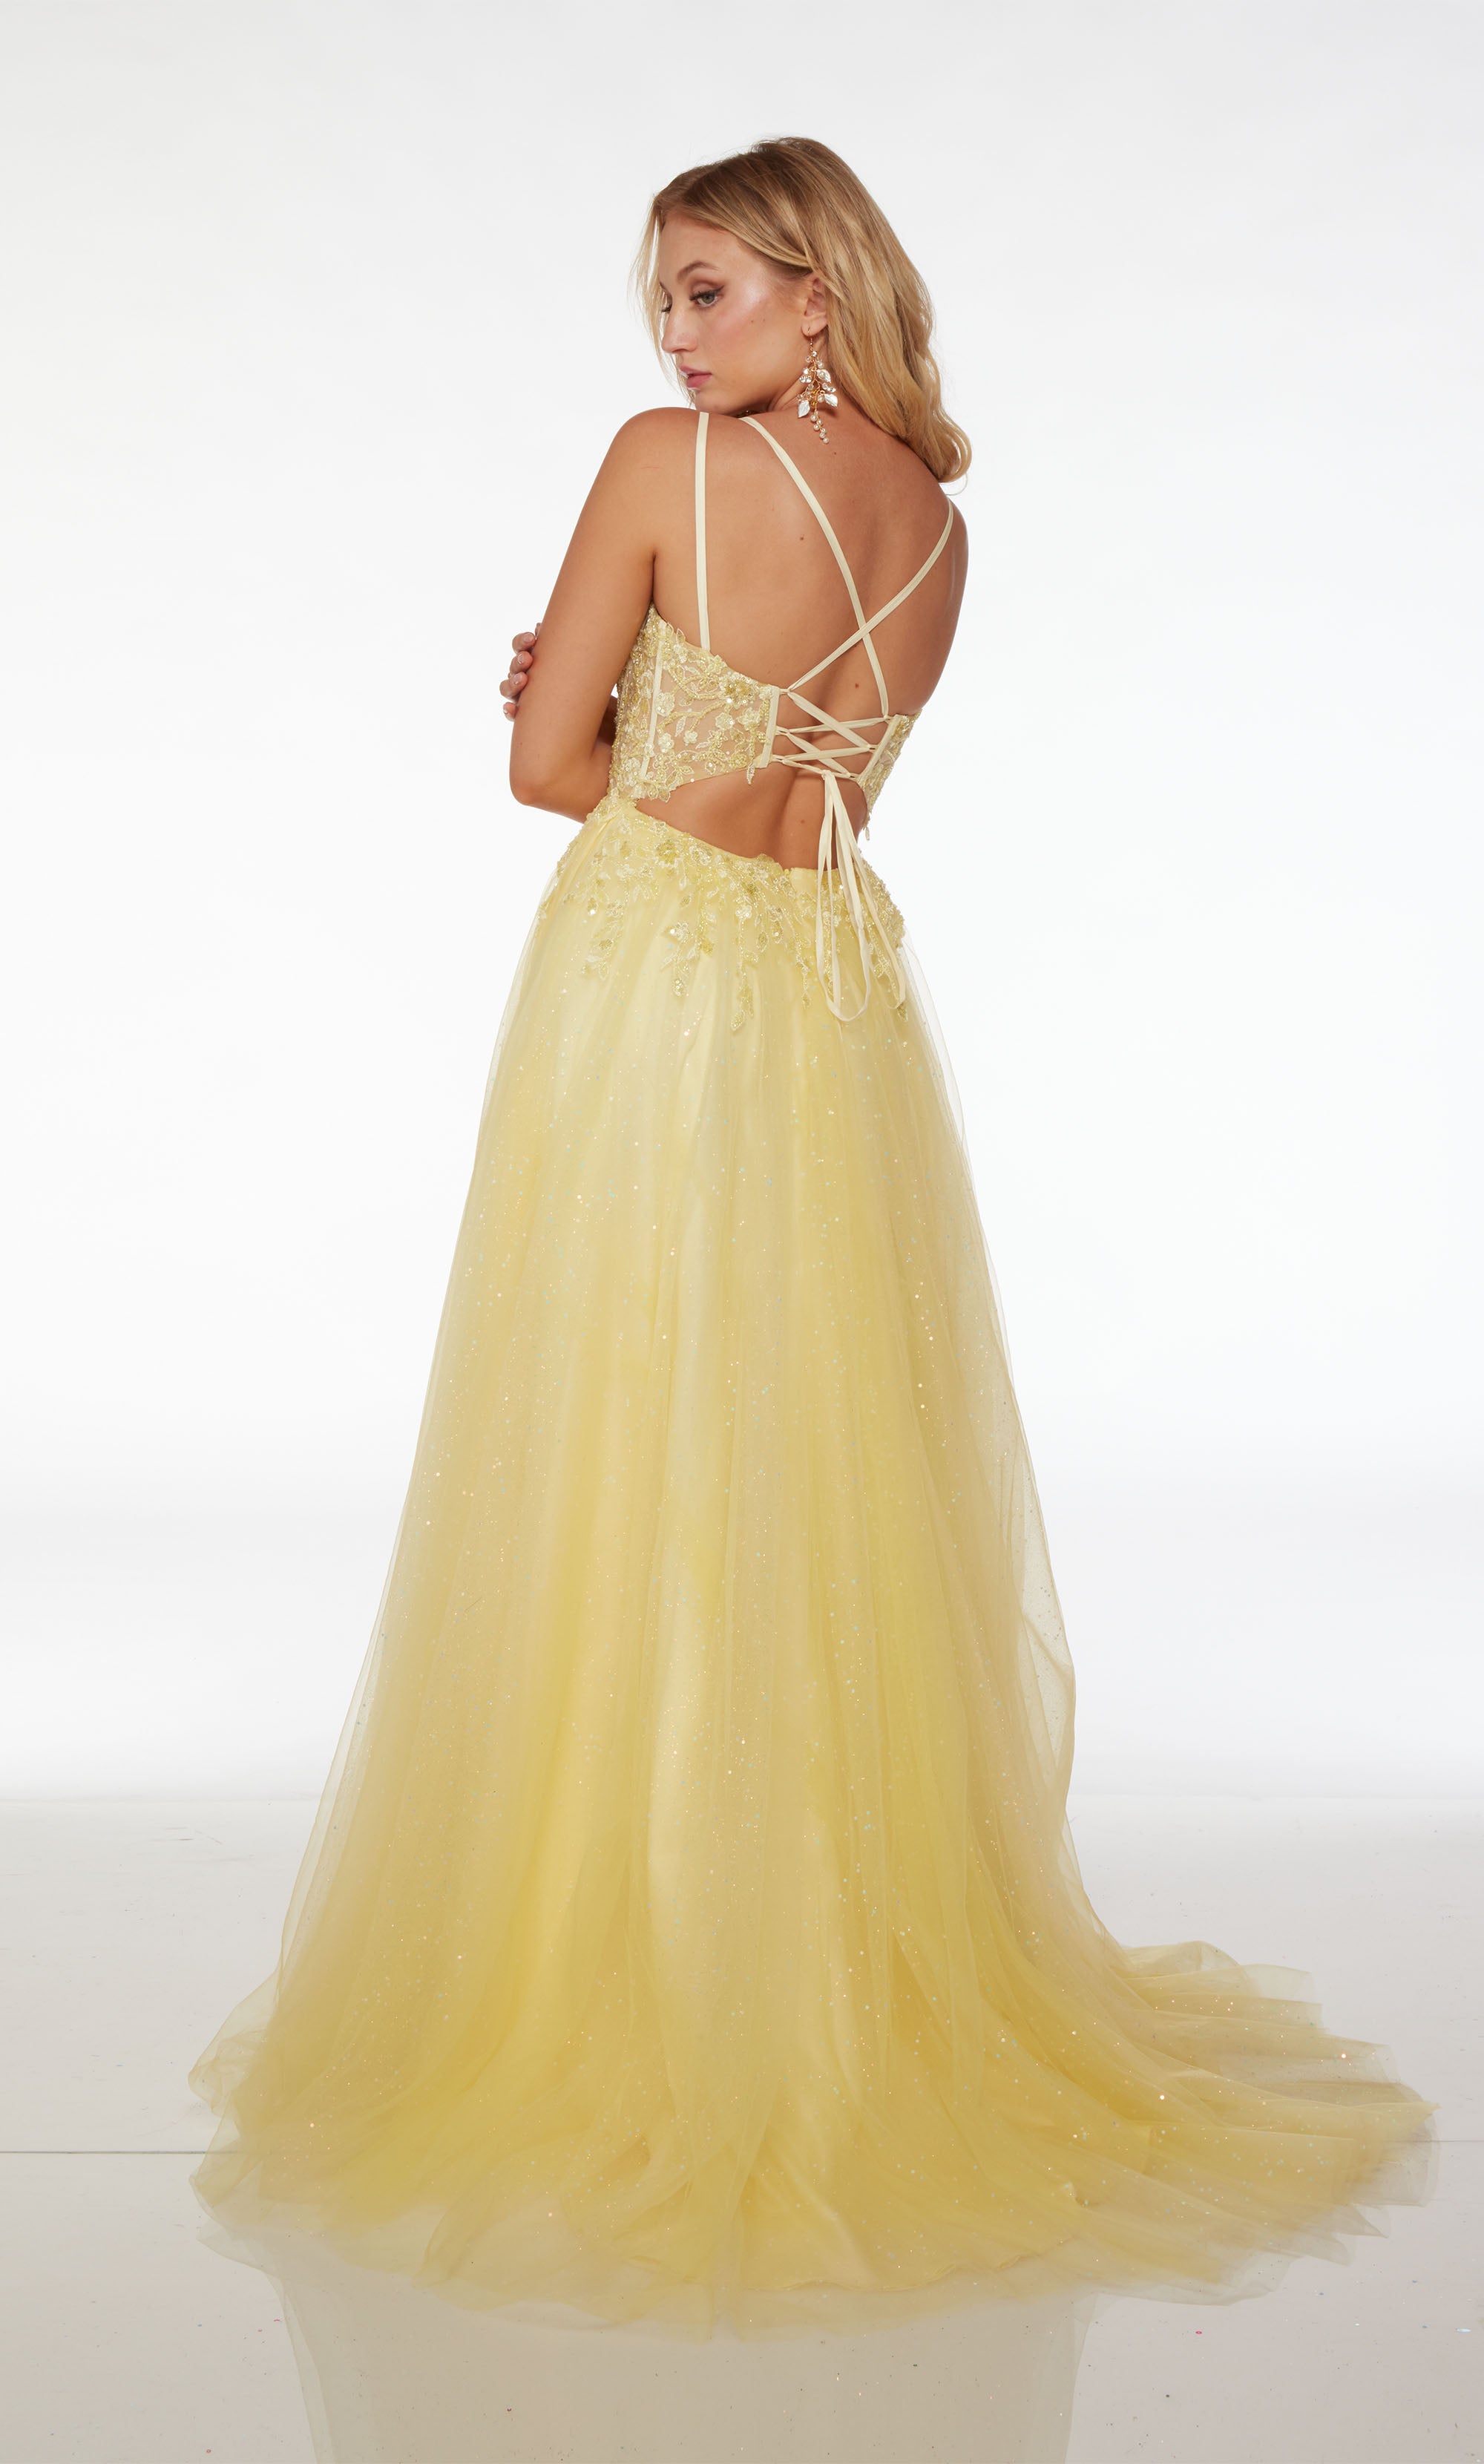 Radiant light yellow prom dress in glitter tulle, adorned with an romantic lace corset top, floral lace appliques, high slit, lace-up back, and an graceful train.